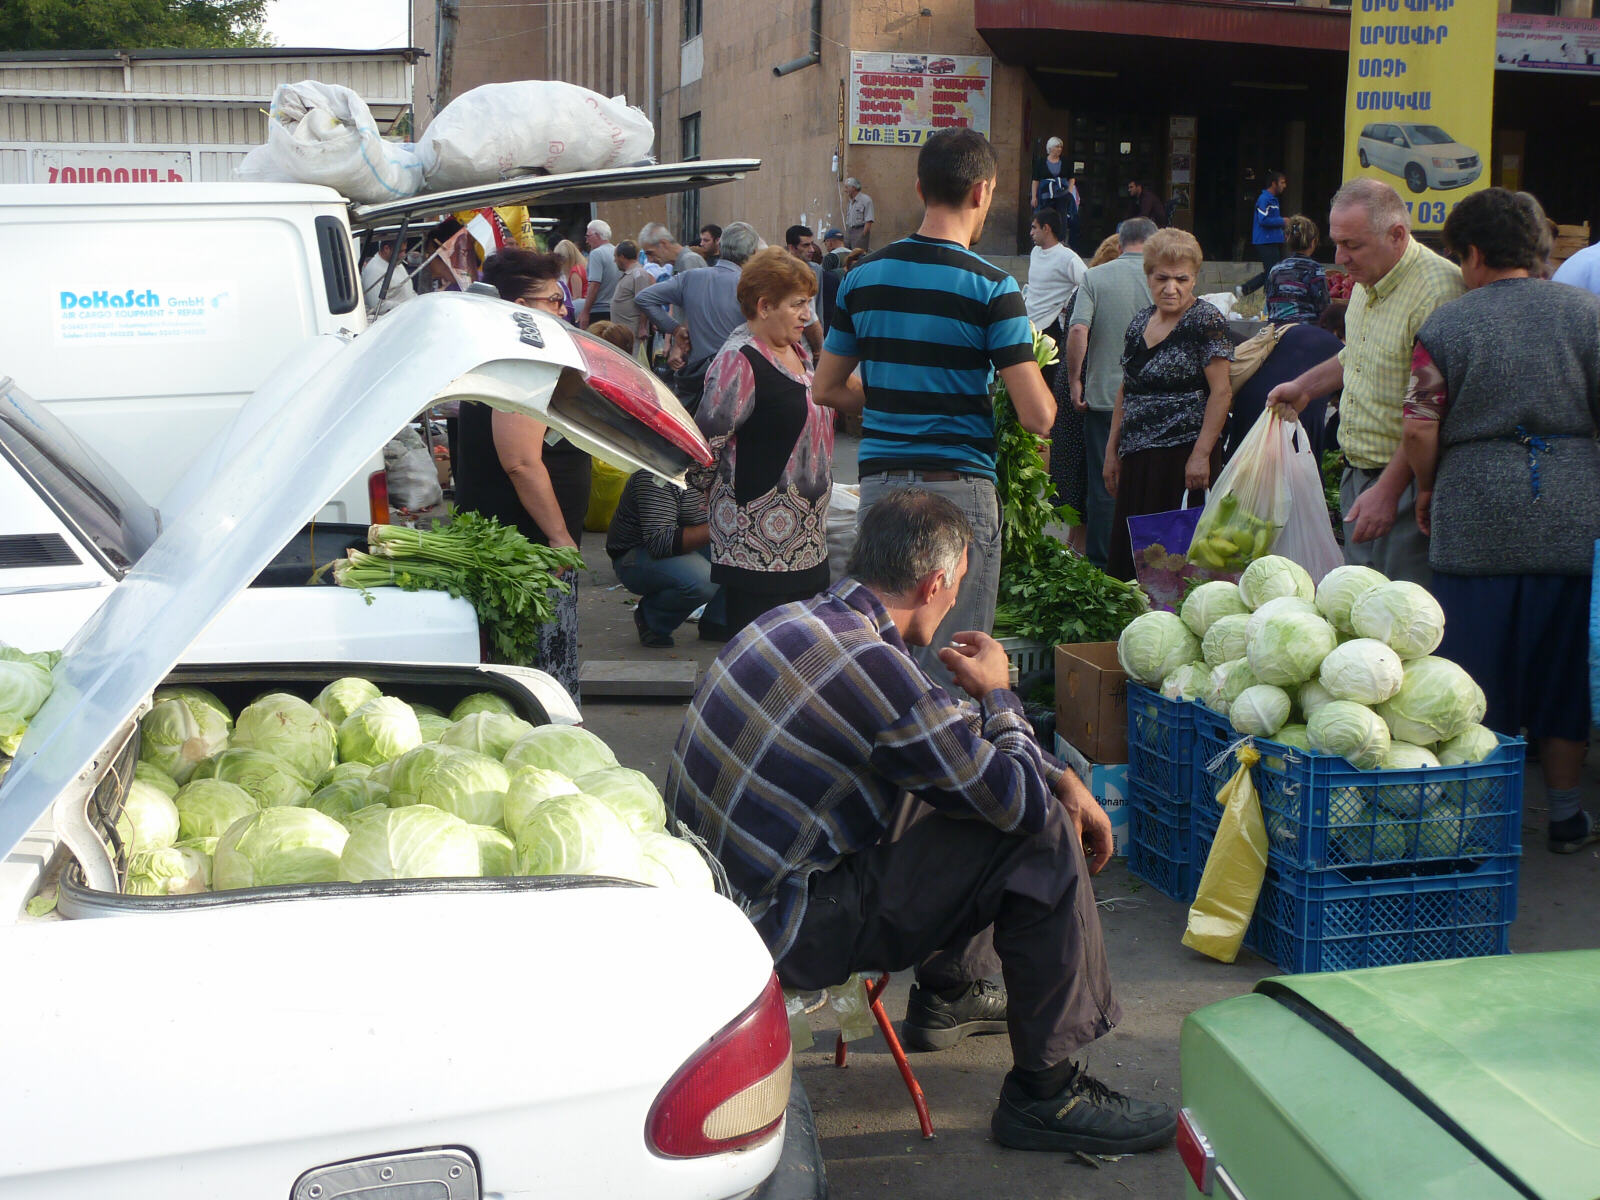 A car full of cabbages in Yerevan, Armenia